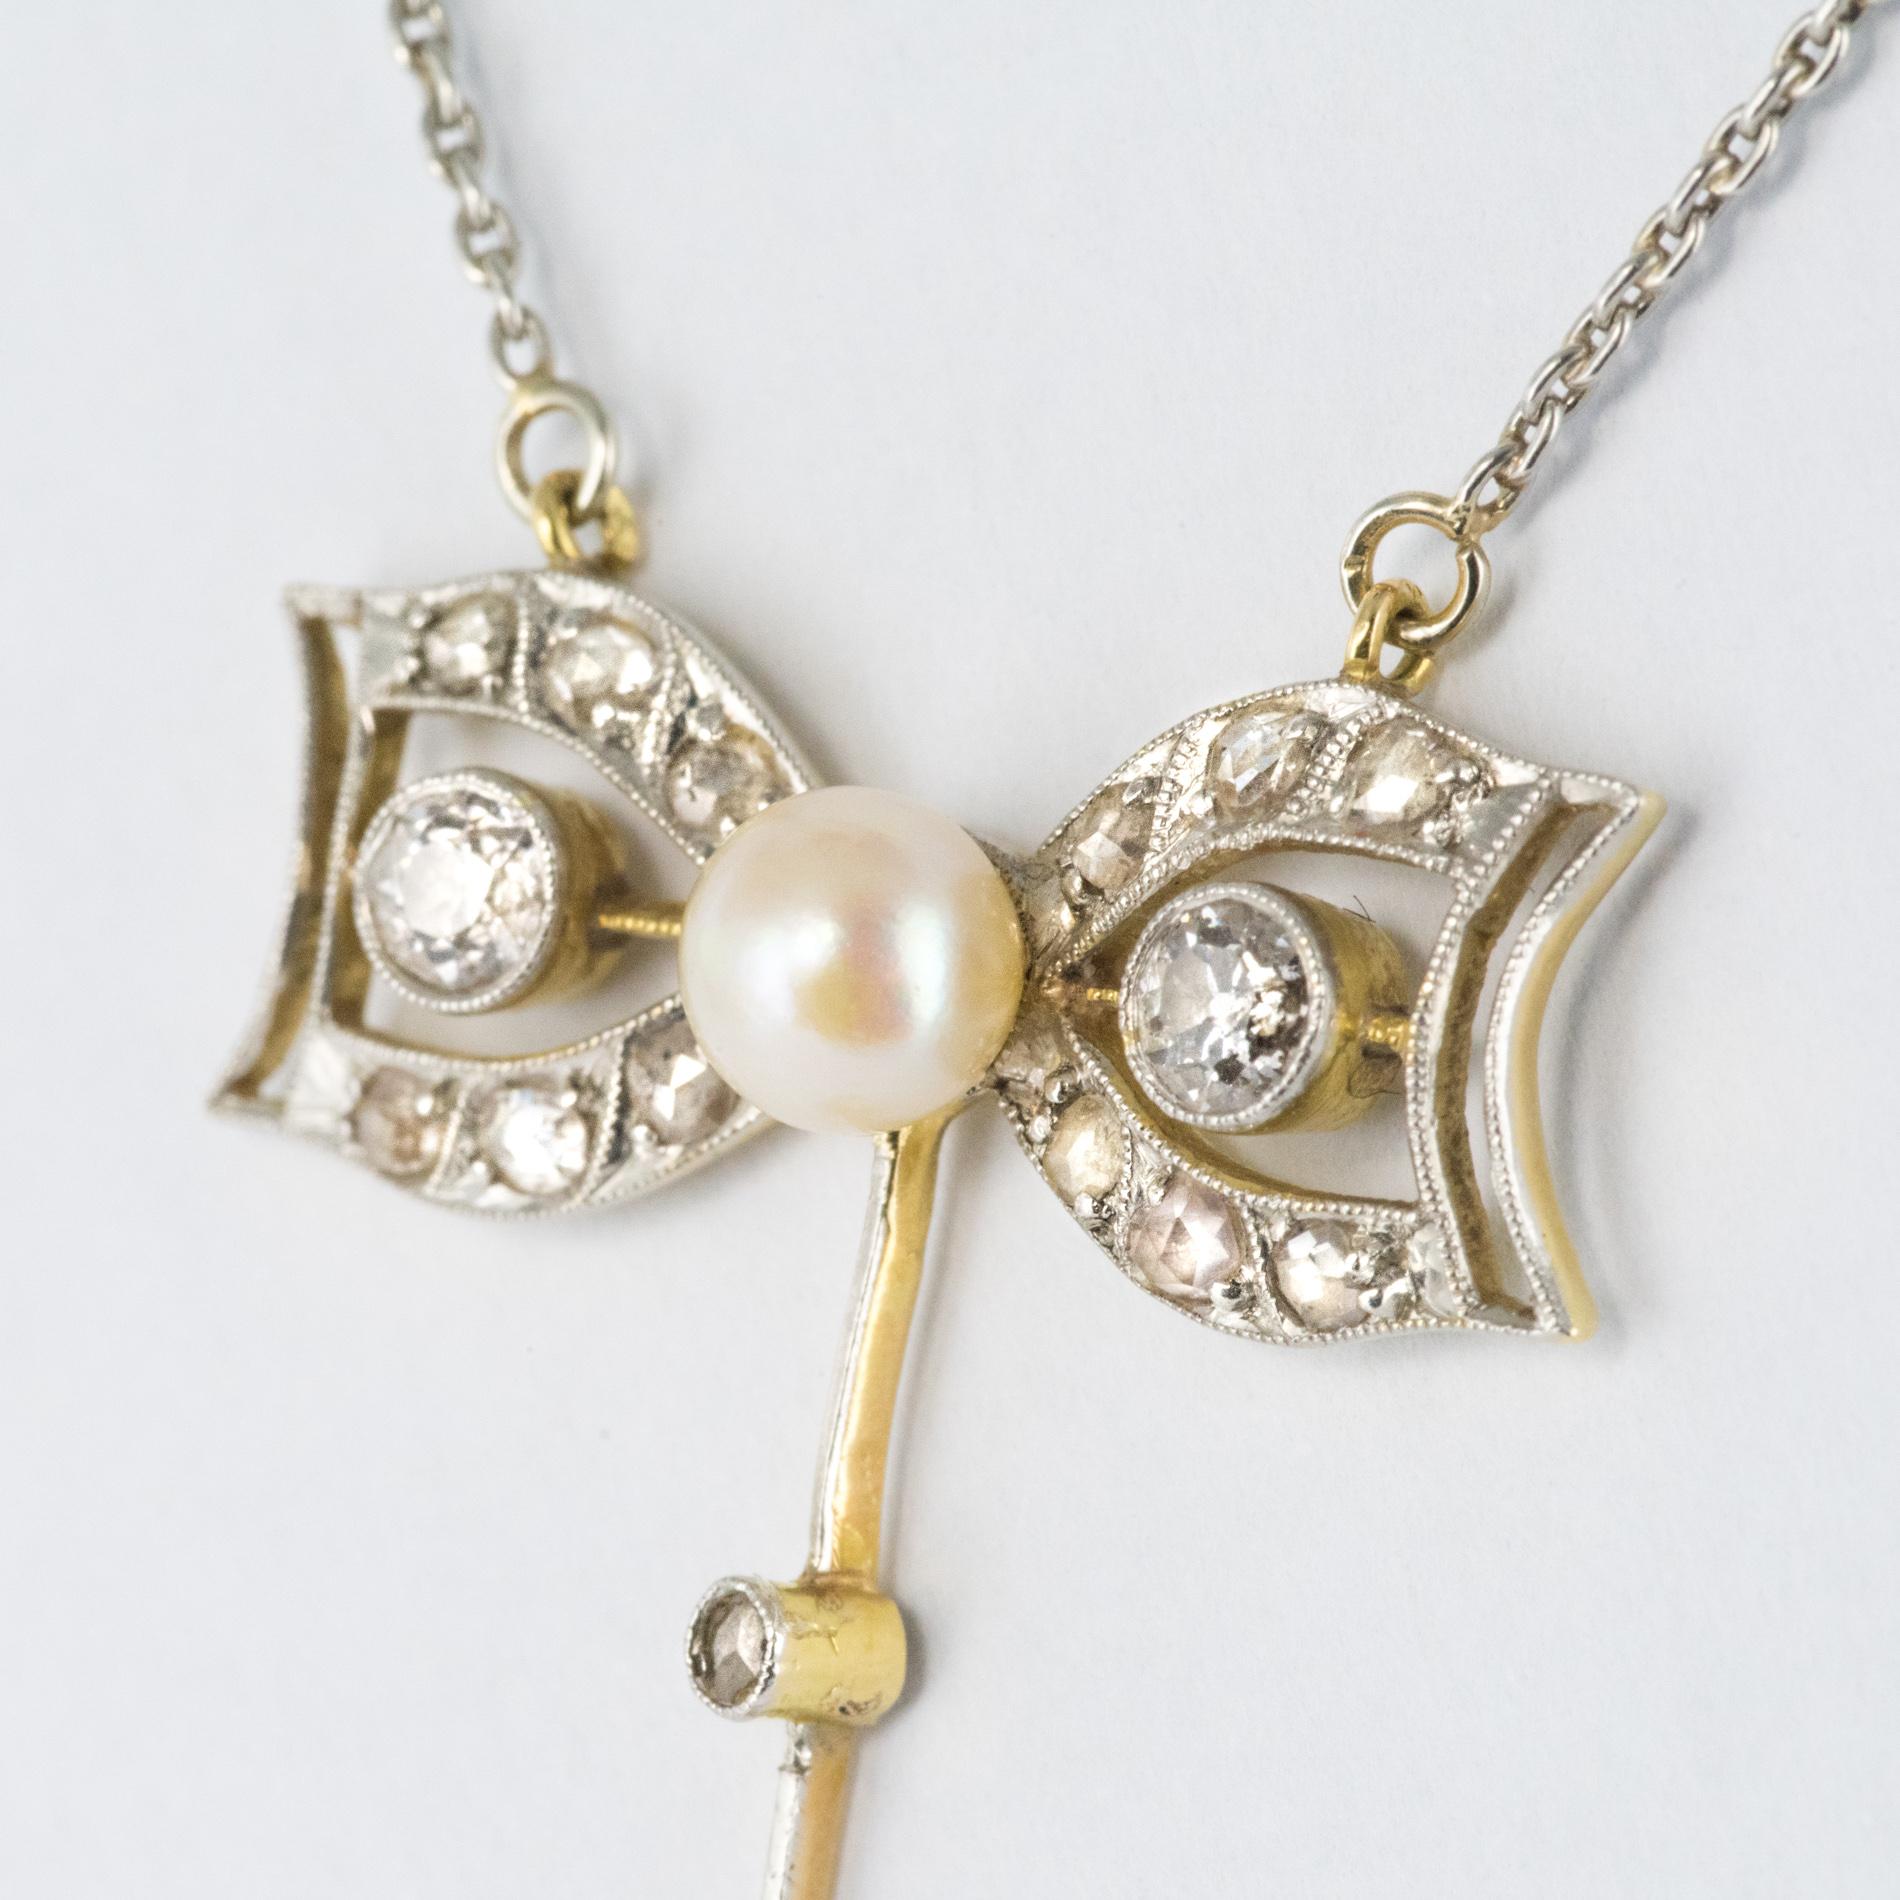 Women's 1920s French Belle Epoque Diamond Cultured Pearl Gold Pendant Necklace